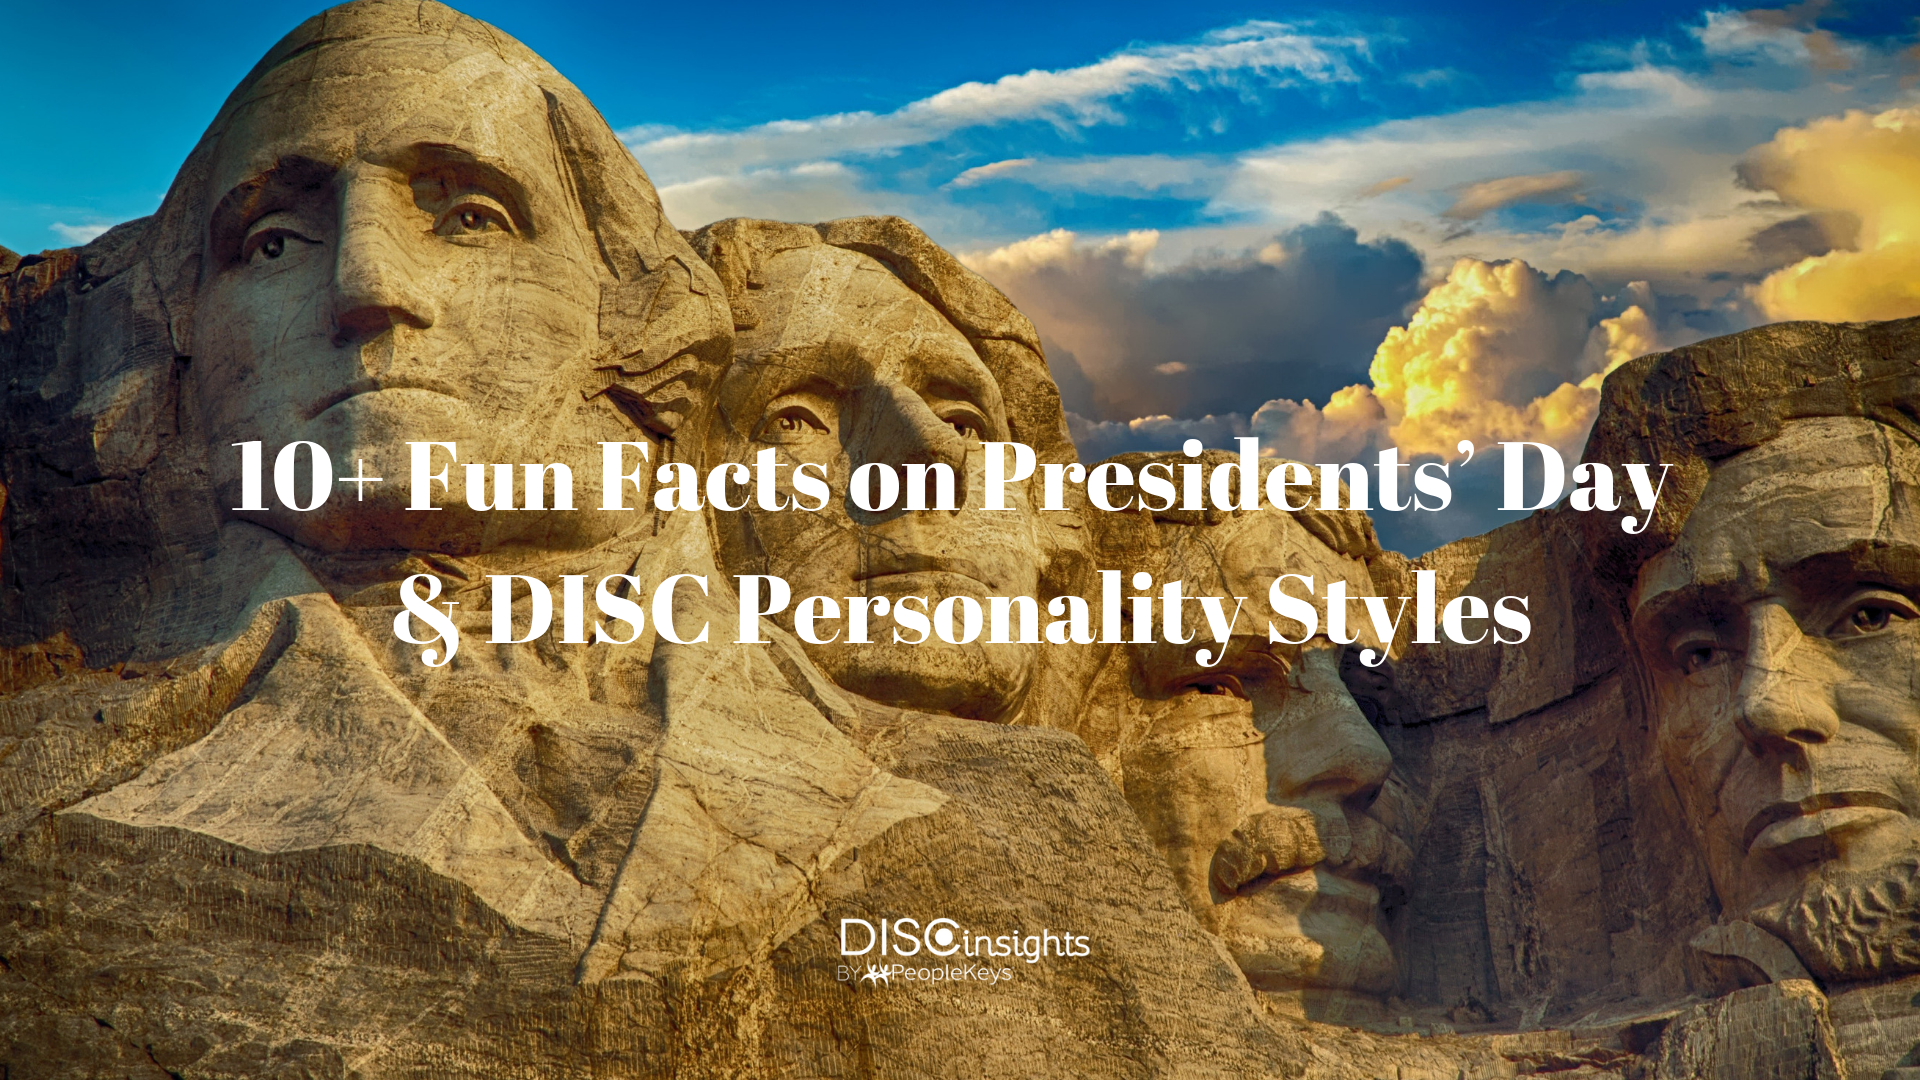 10+ Fun Facts on Presidents’ Day & DISC Personality Styles